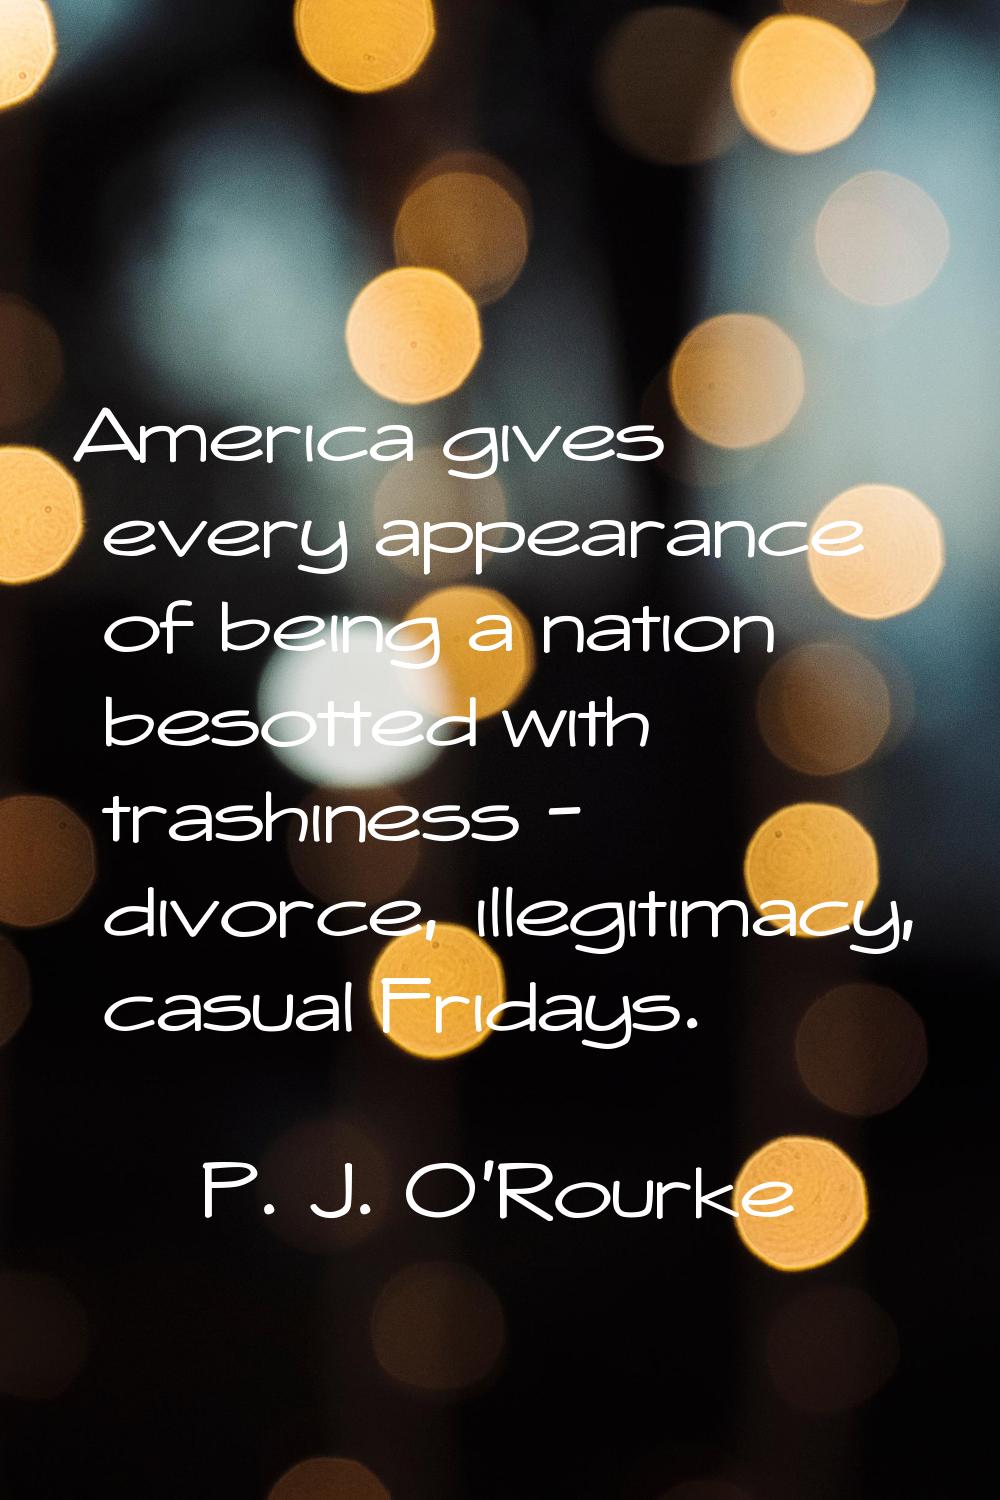 America gives every appearance of being a nation besotted with trashiness - divorce, illegitimacy, 